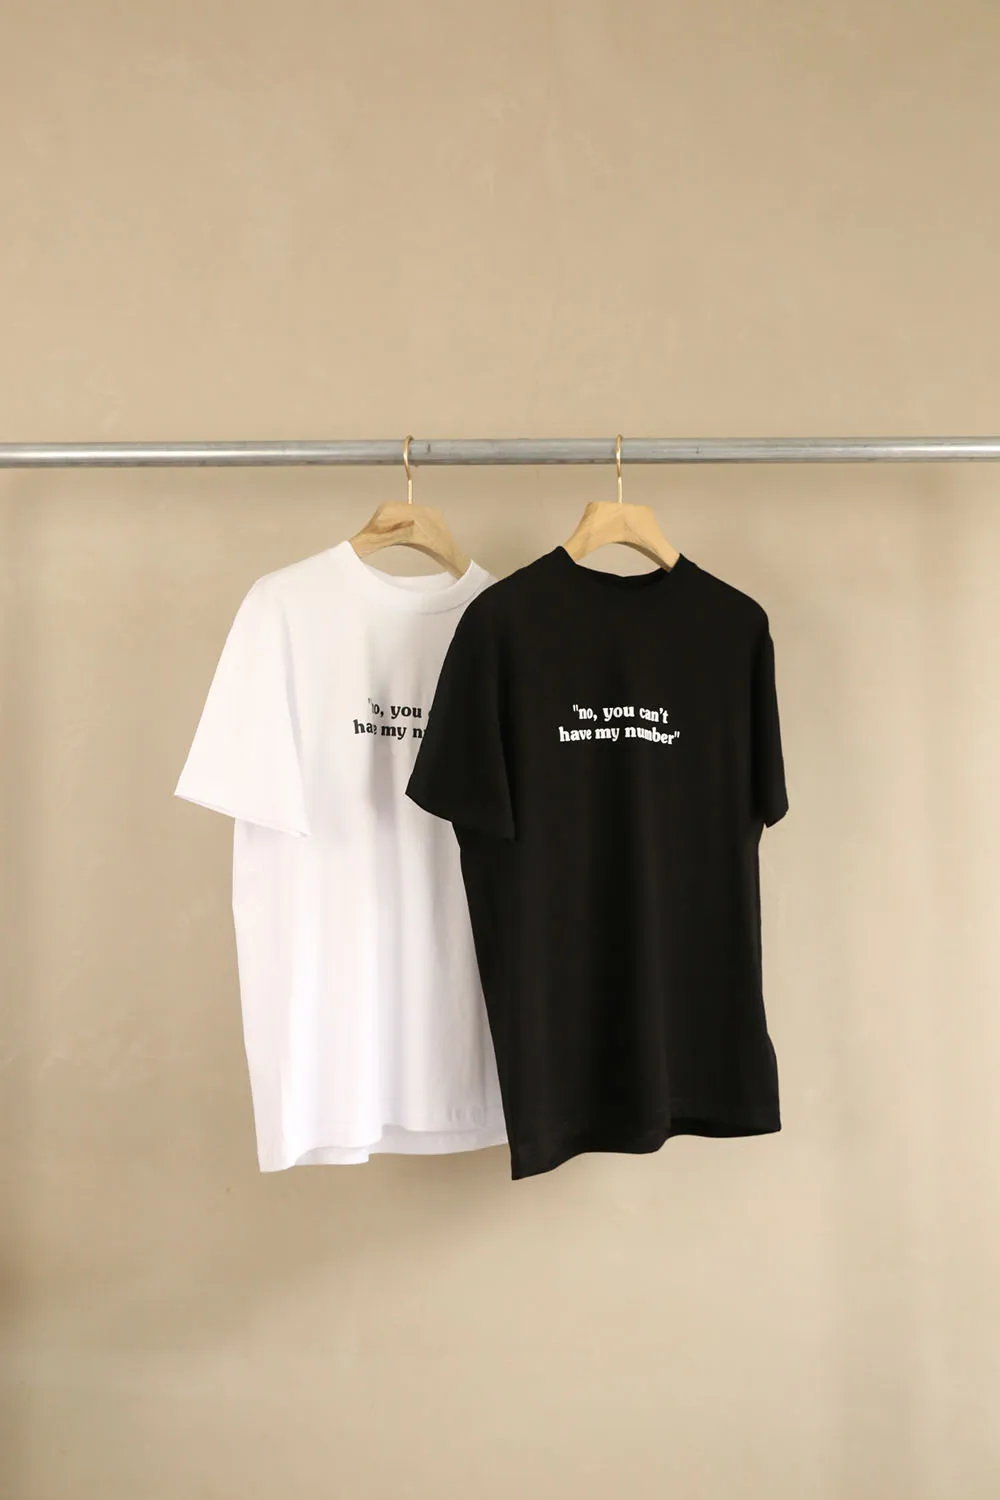 

2024 Summer New Arrive Abloh T shirt No You Can't Have My Number T-shirts Men Women Fashion Streetwear Top Tees Pure Cotton